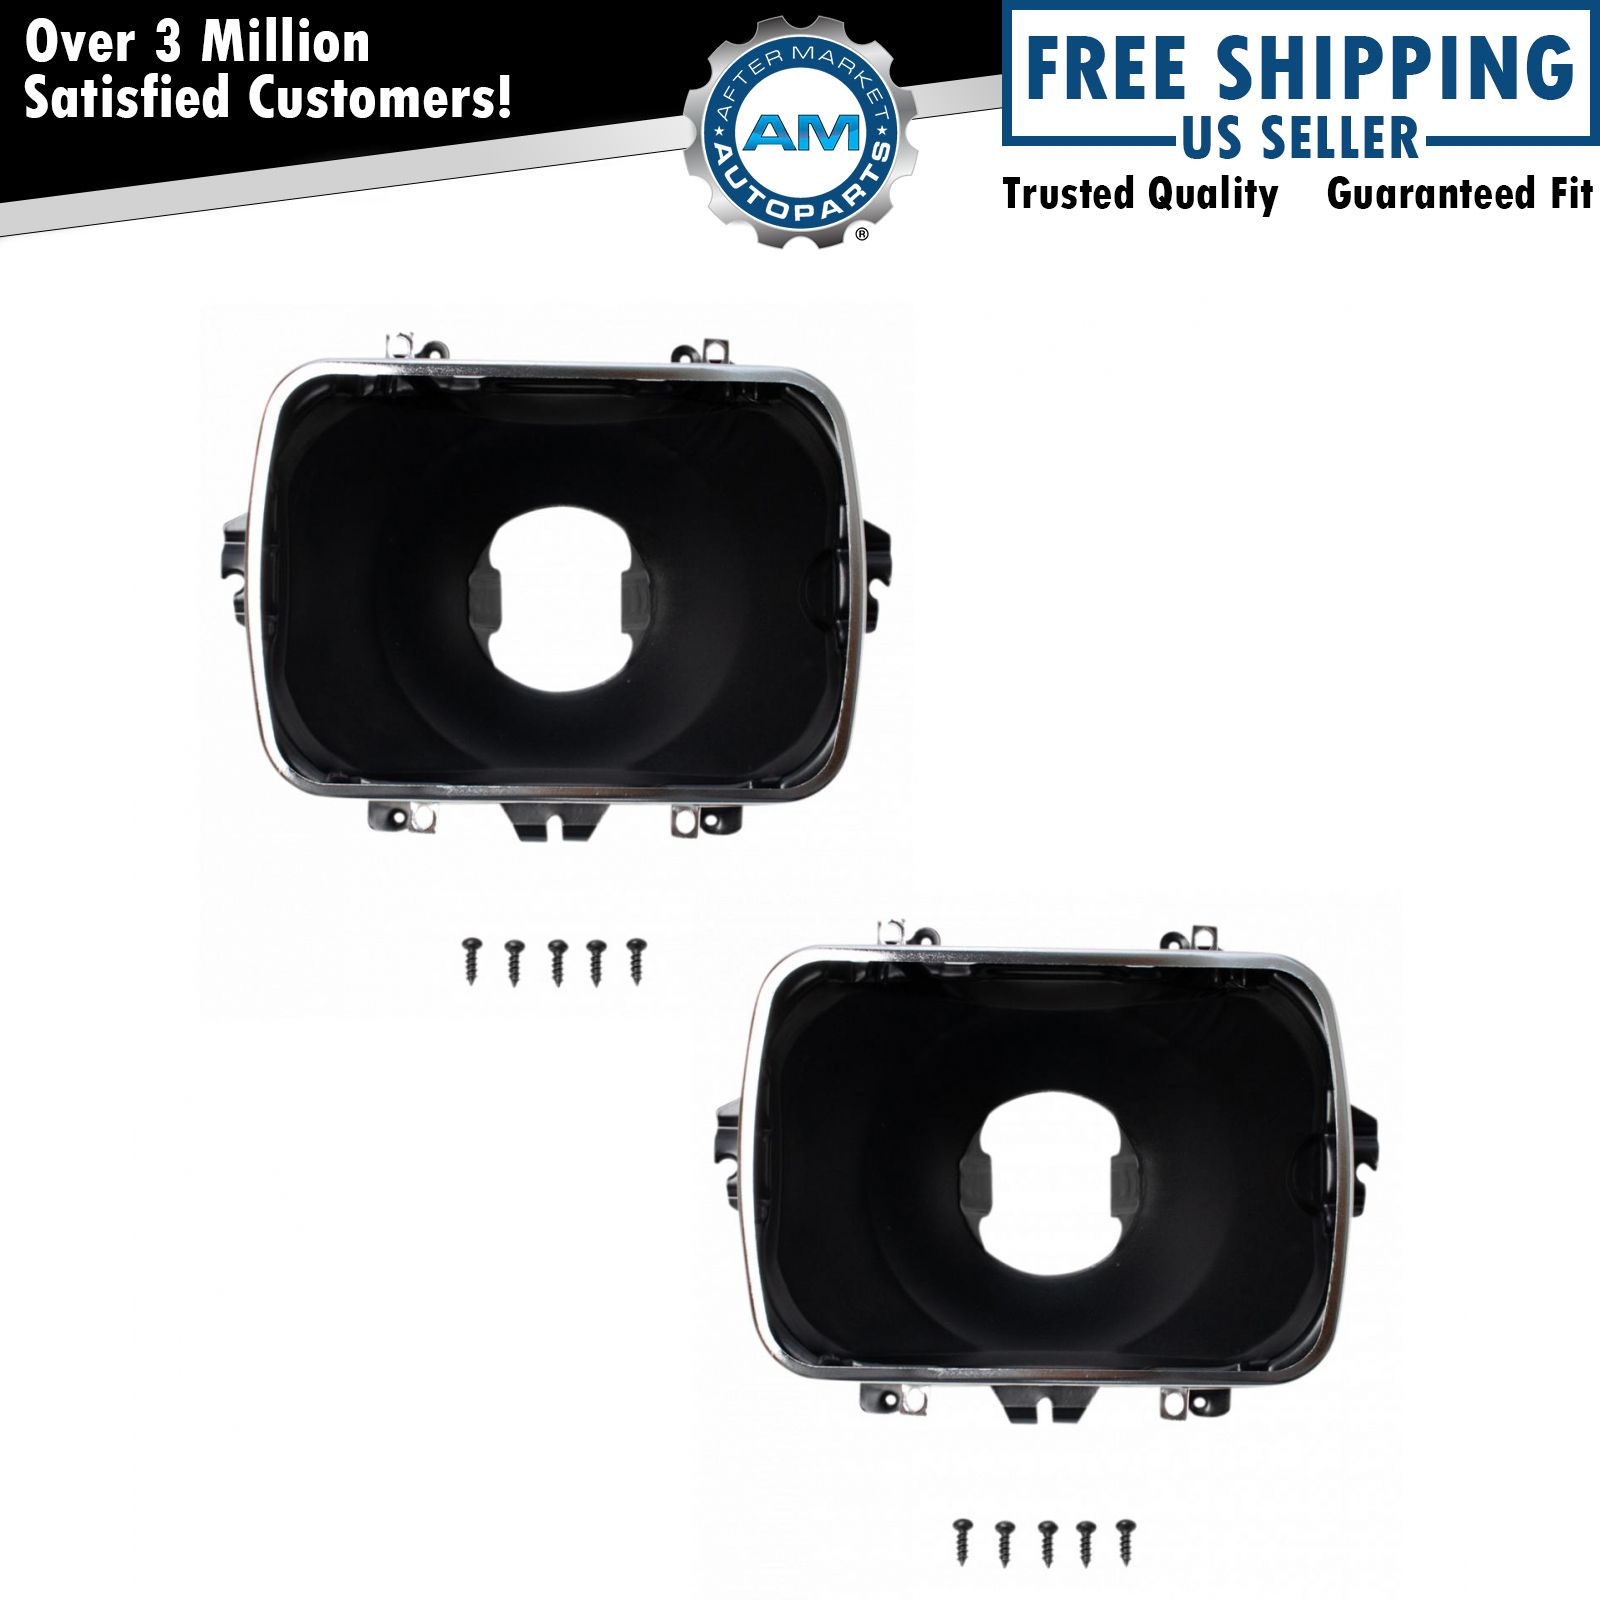 2pc Headlight Support Bracket Mounting Kit LH & RH Sides for Chevy GMC